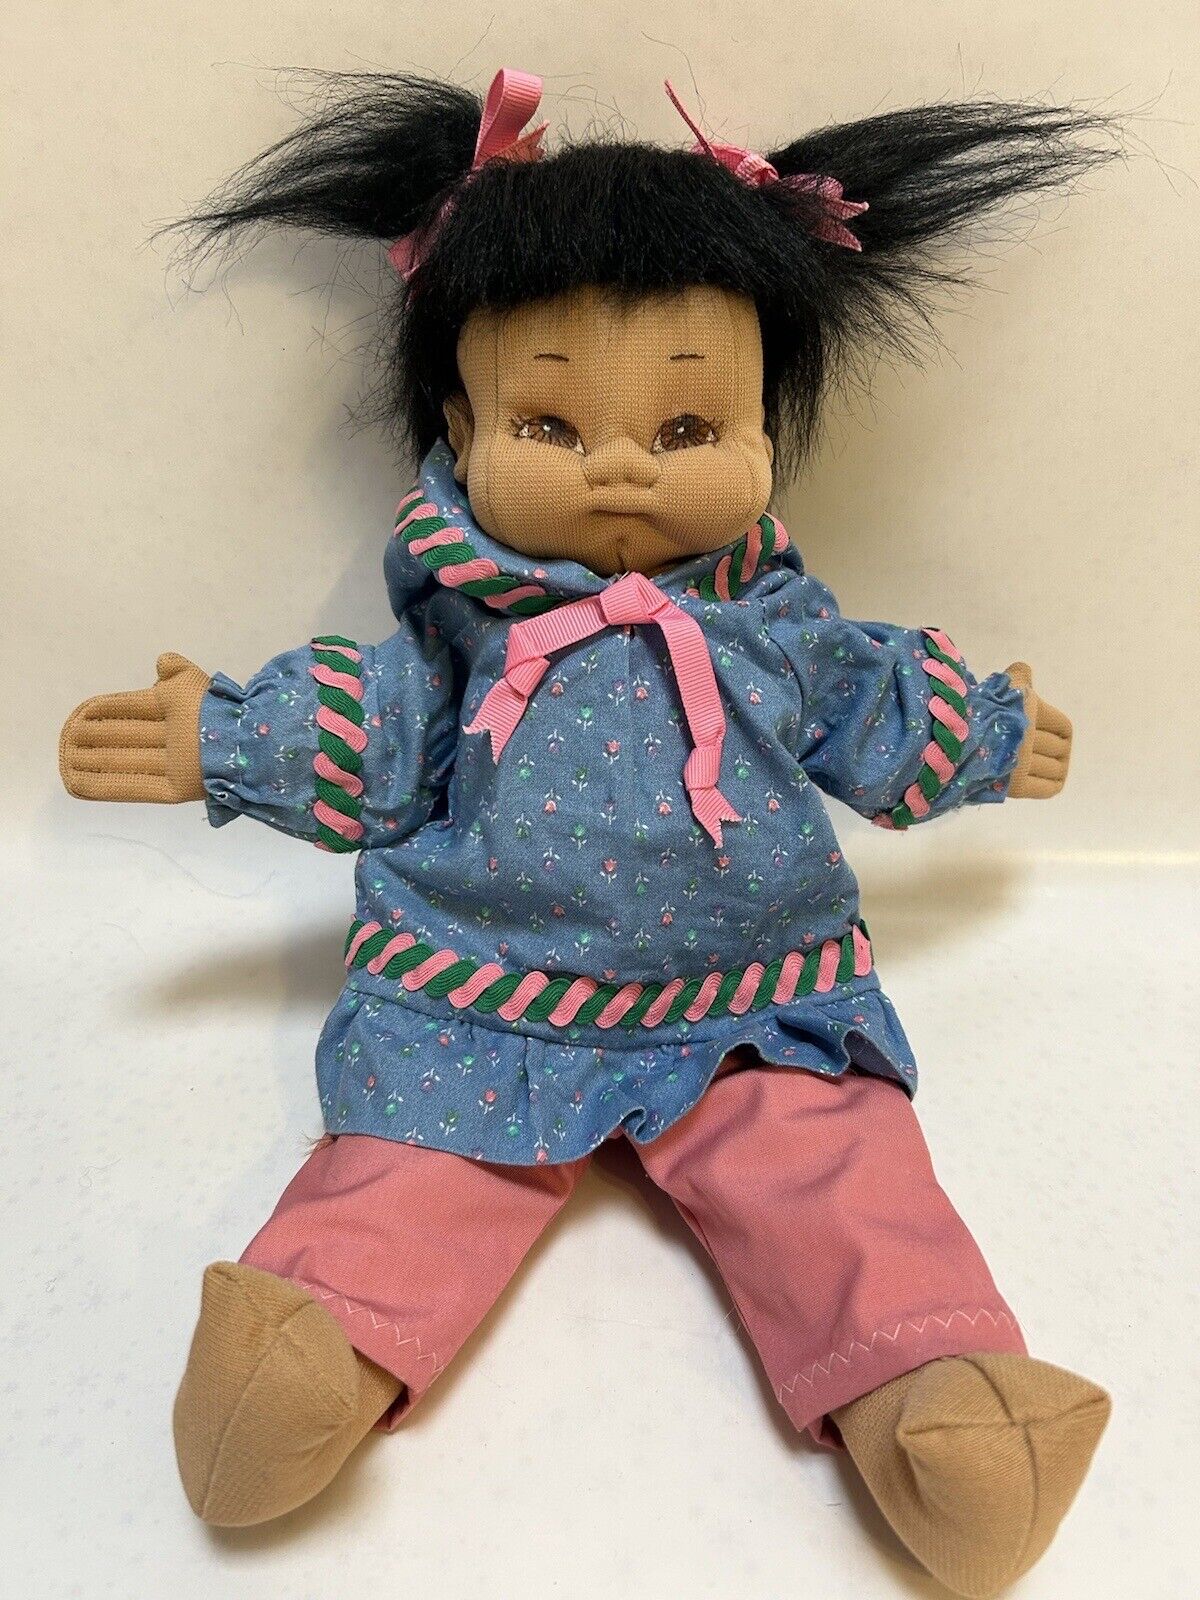 Homemade Native American Indian Doll 14” Plush Unique Made By Jean Lear 85’